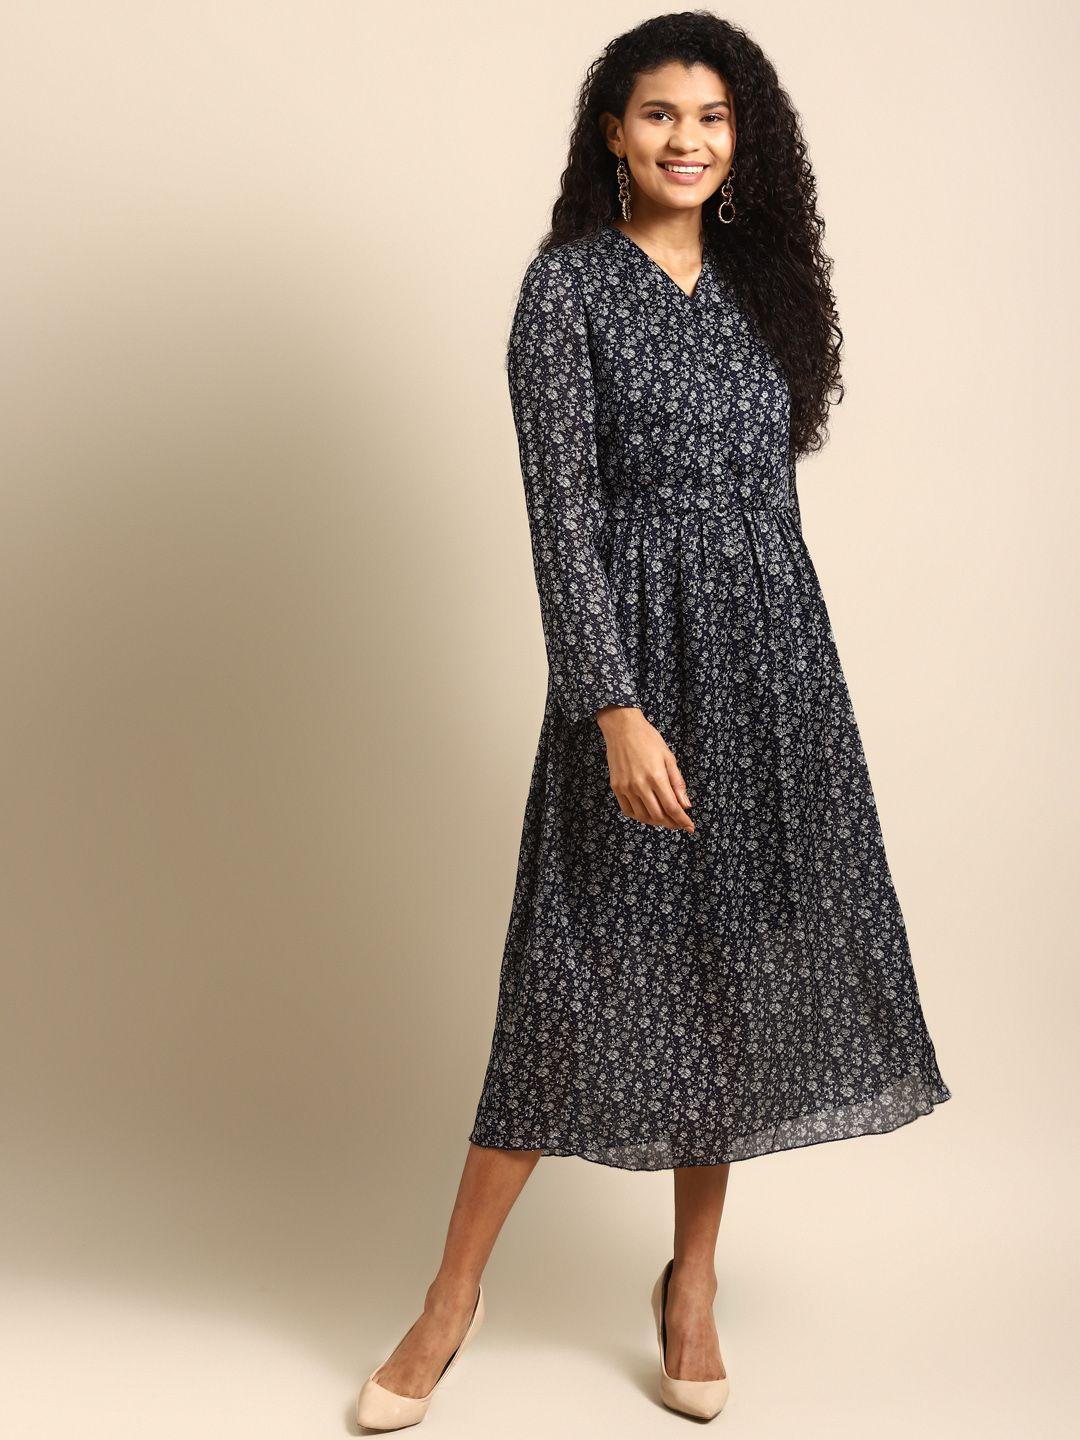 dodo & moa women navy blue & white floral printed fit and flare dress